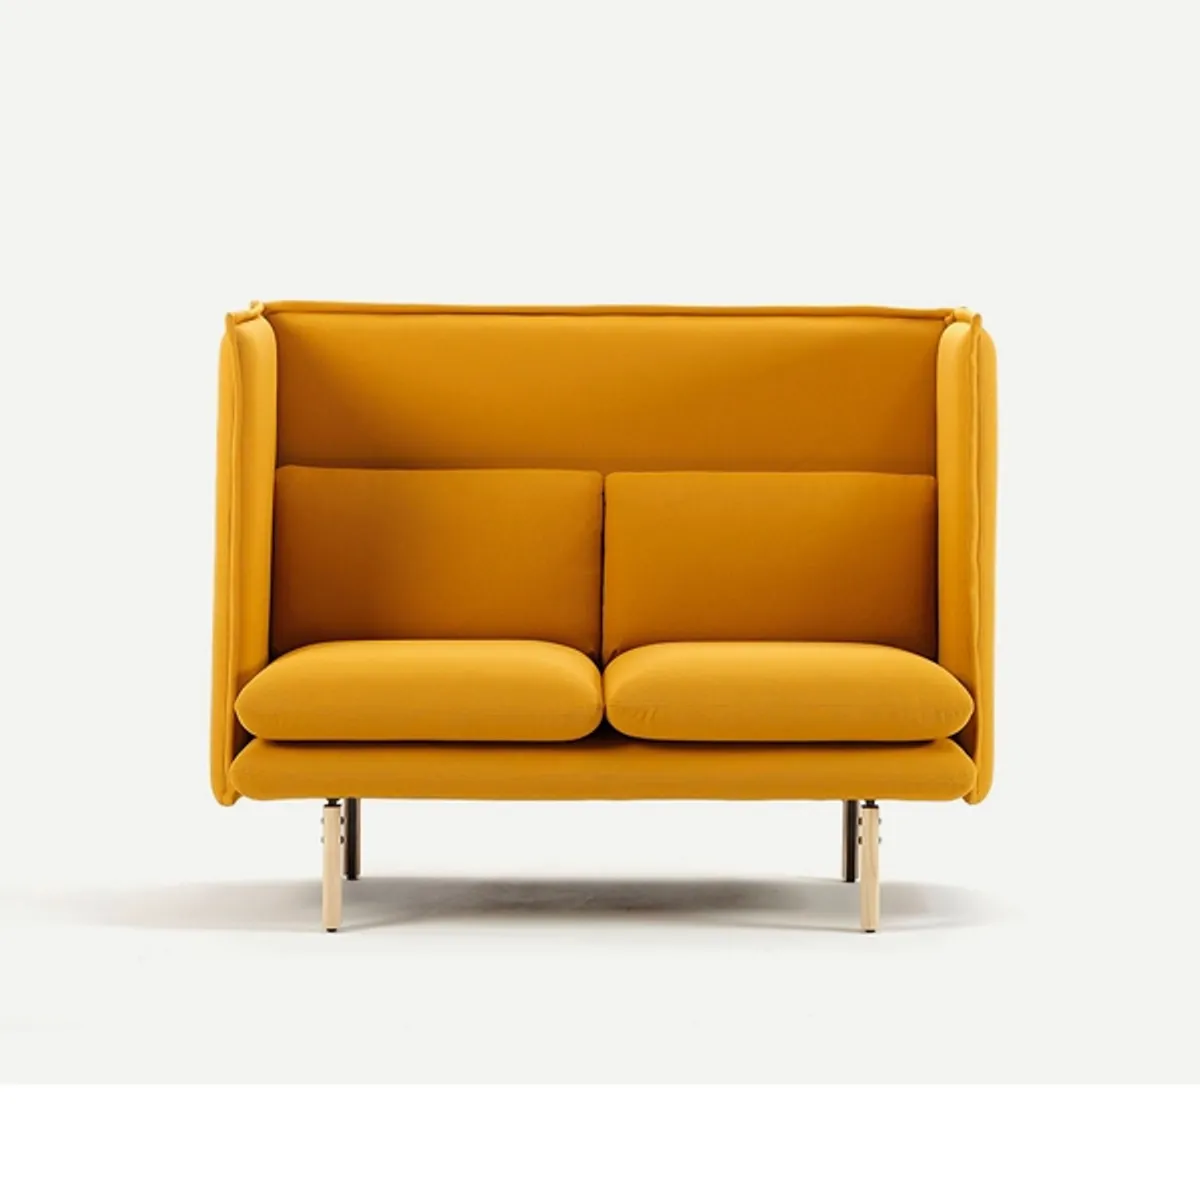 Rew sofa Inside Out Contracts2